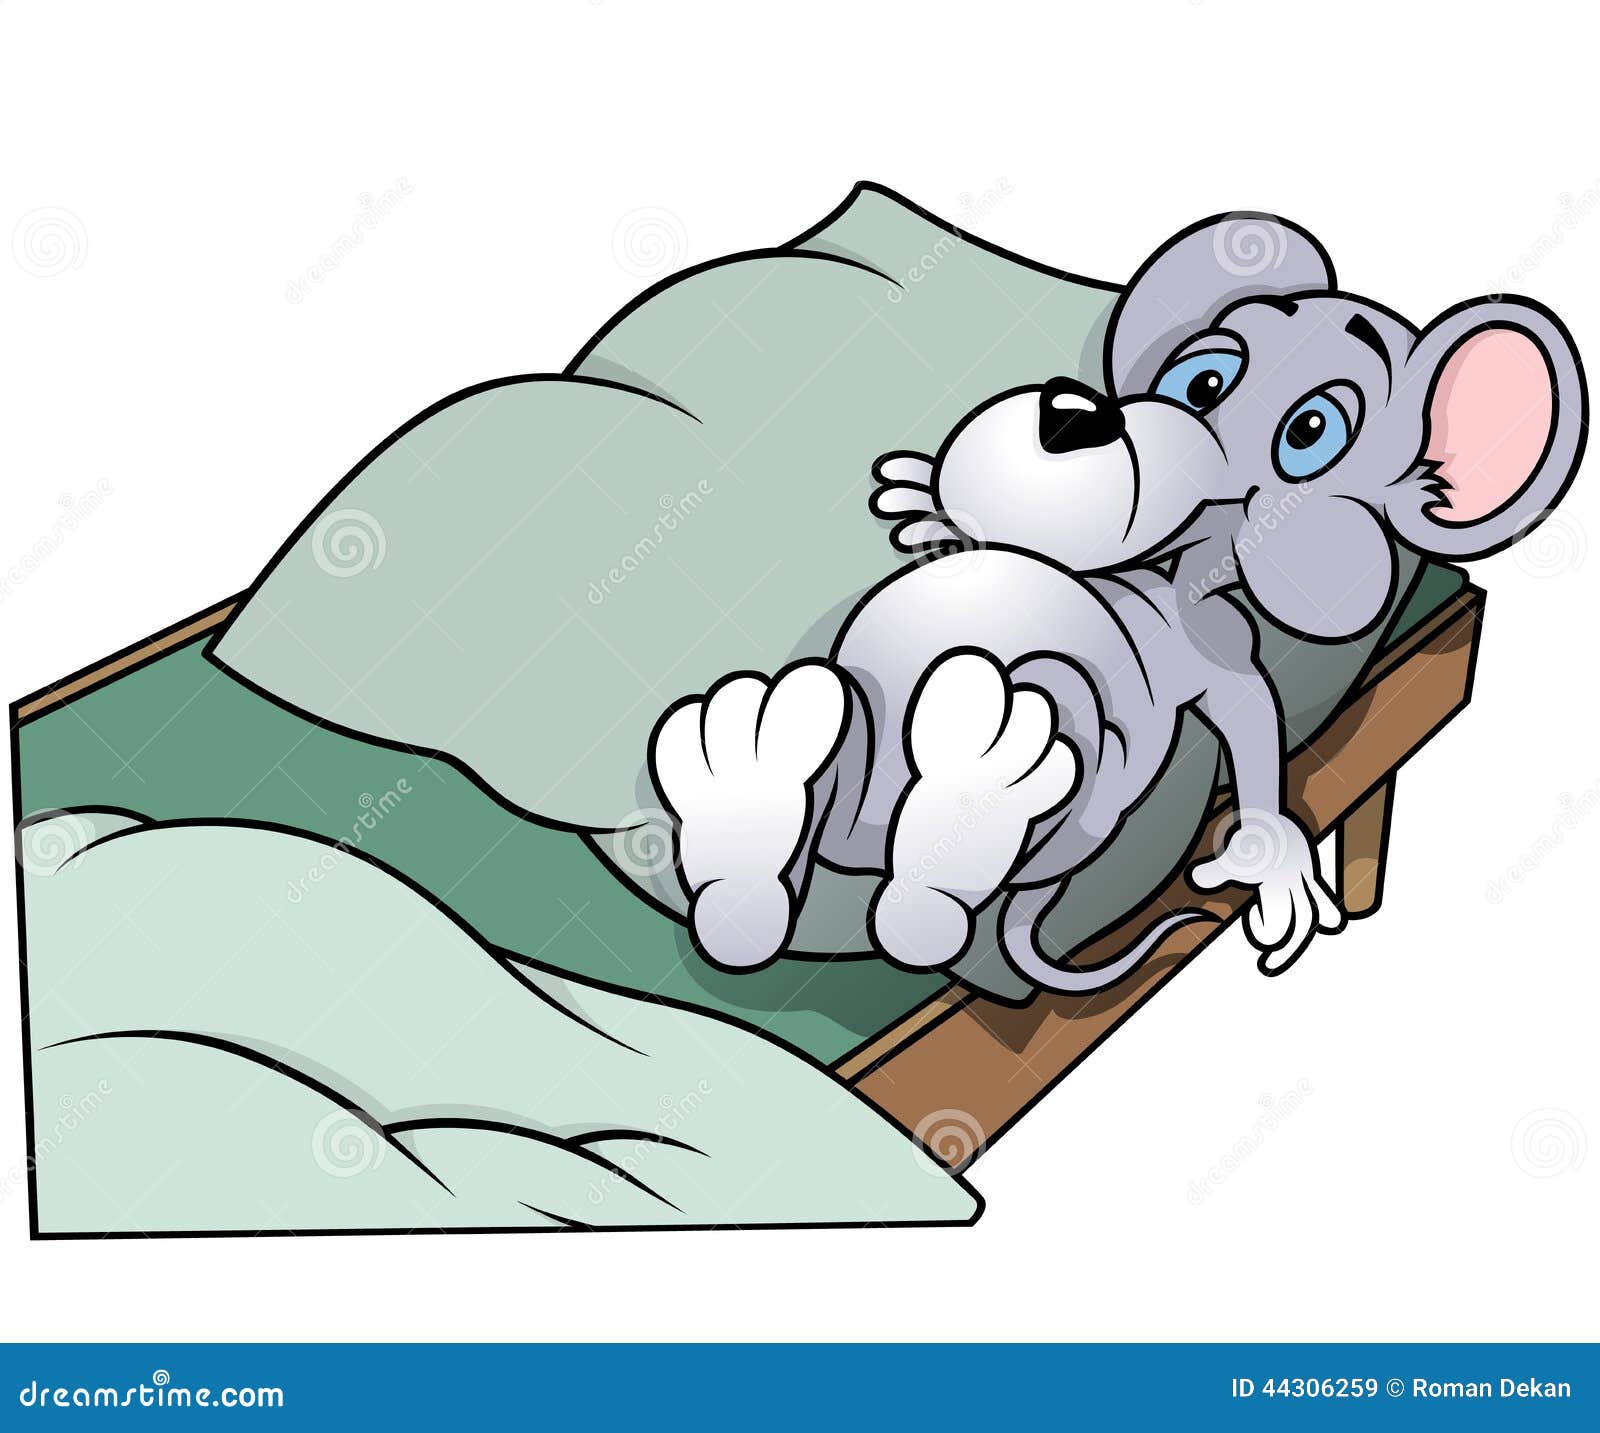 Mouse Laying In Bed Stock Vector - Image: 44306259